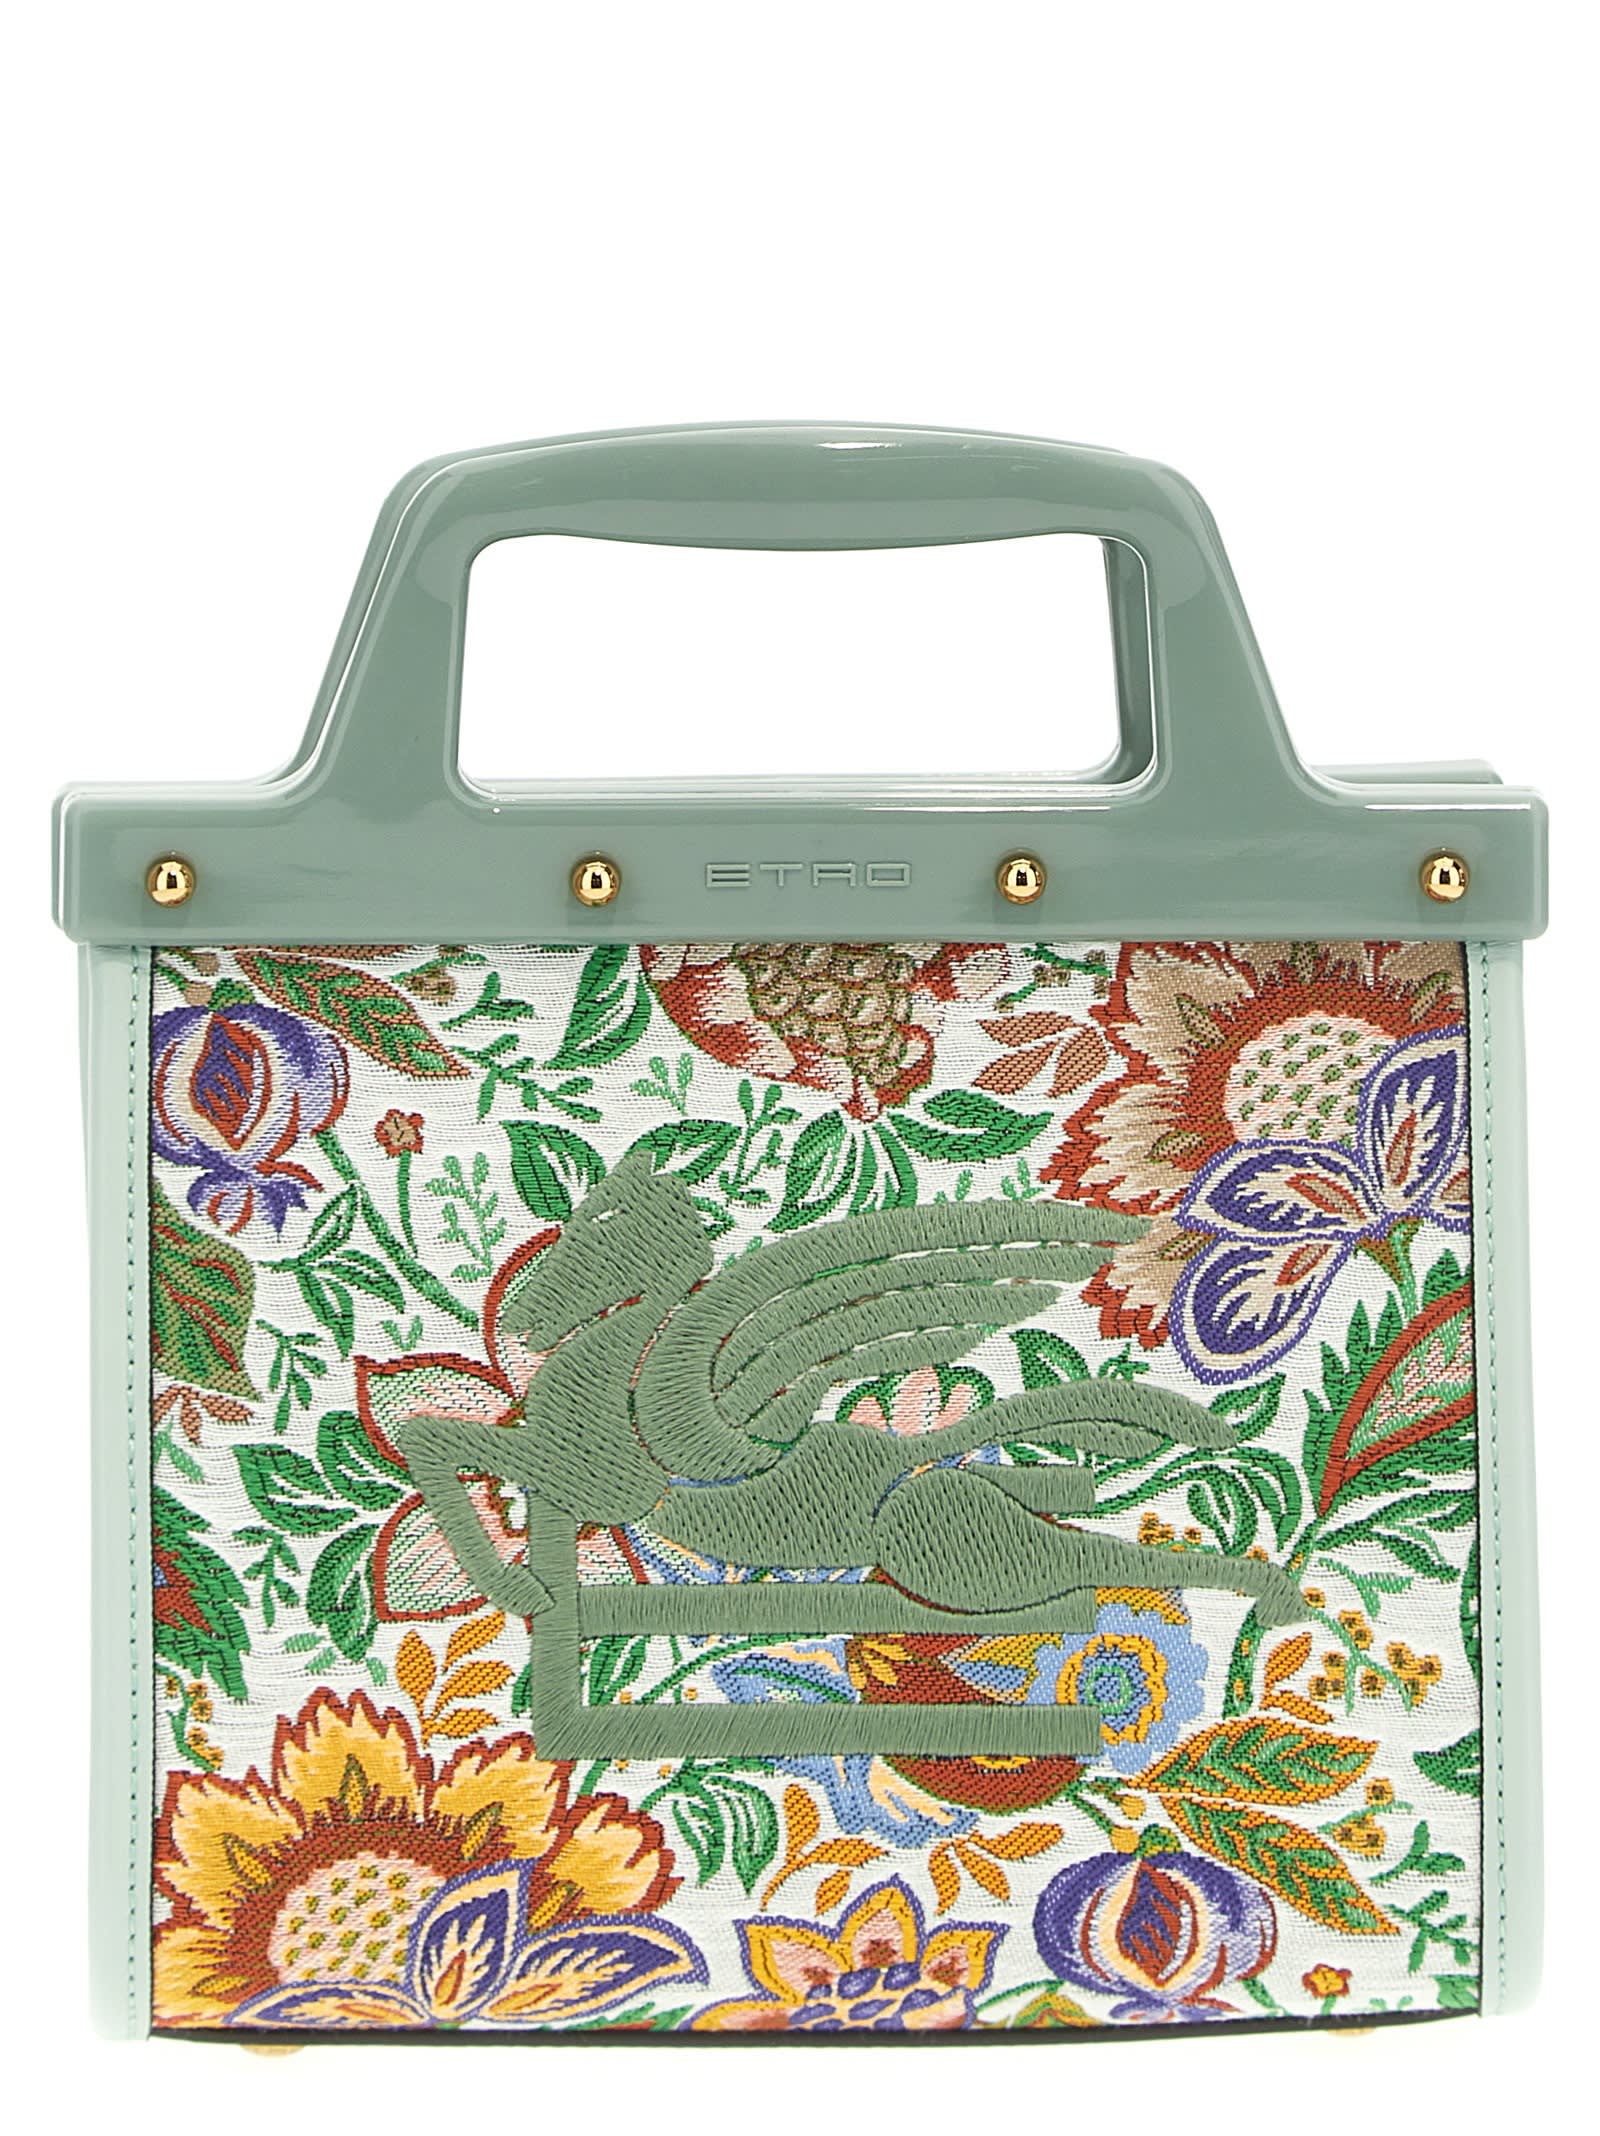 ETRO LOVE TROTTER SMALL SHOPPING BAG